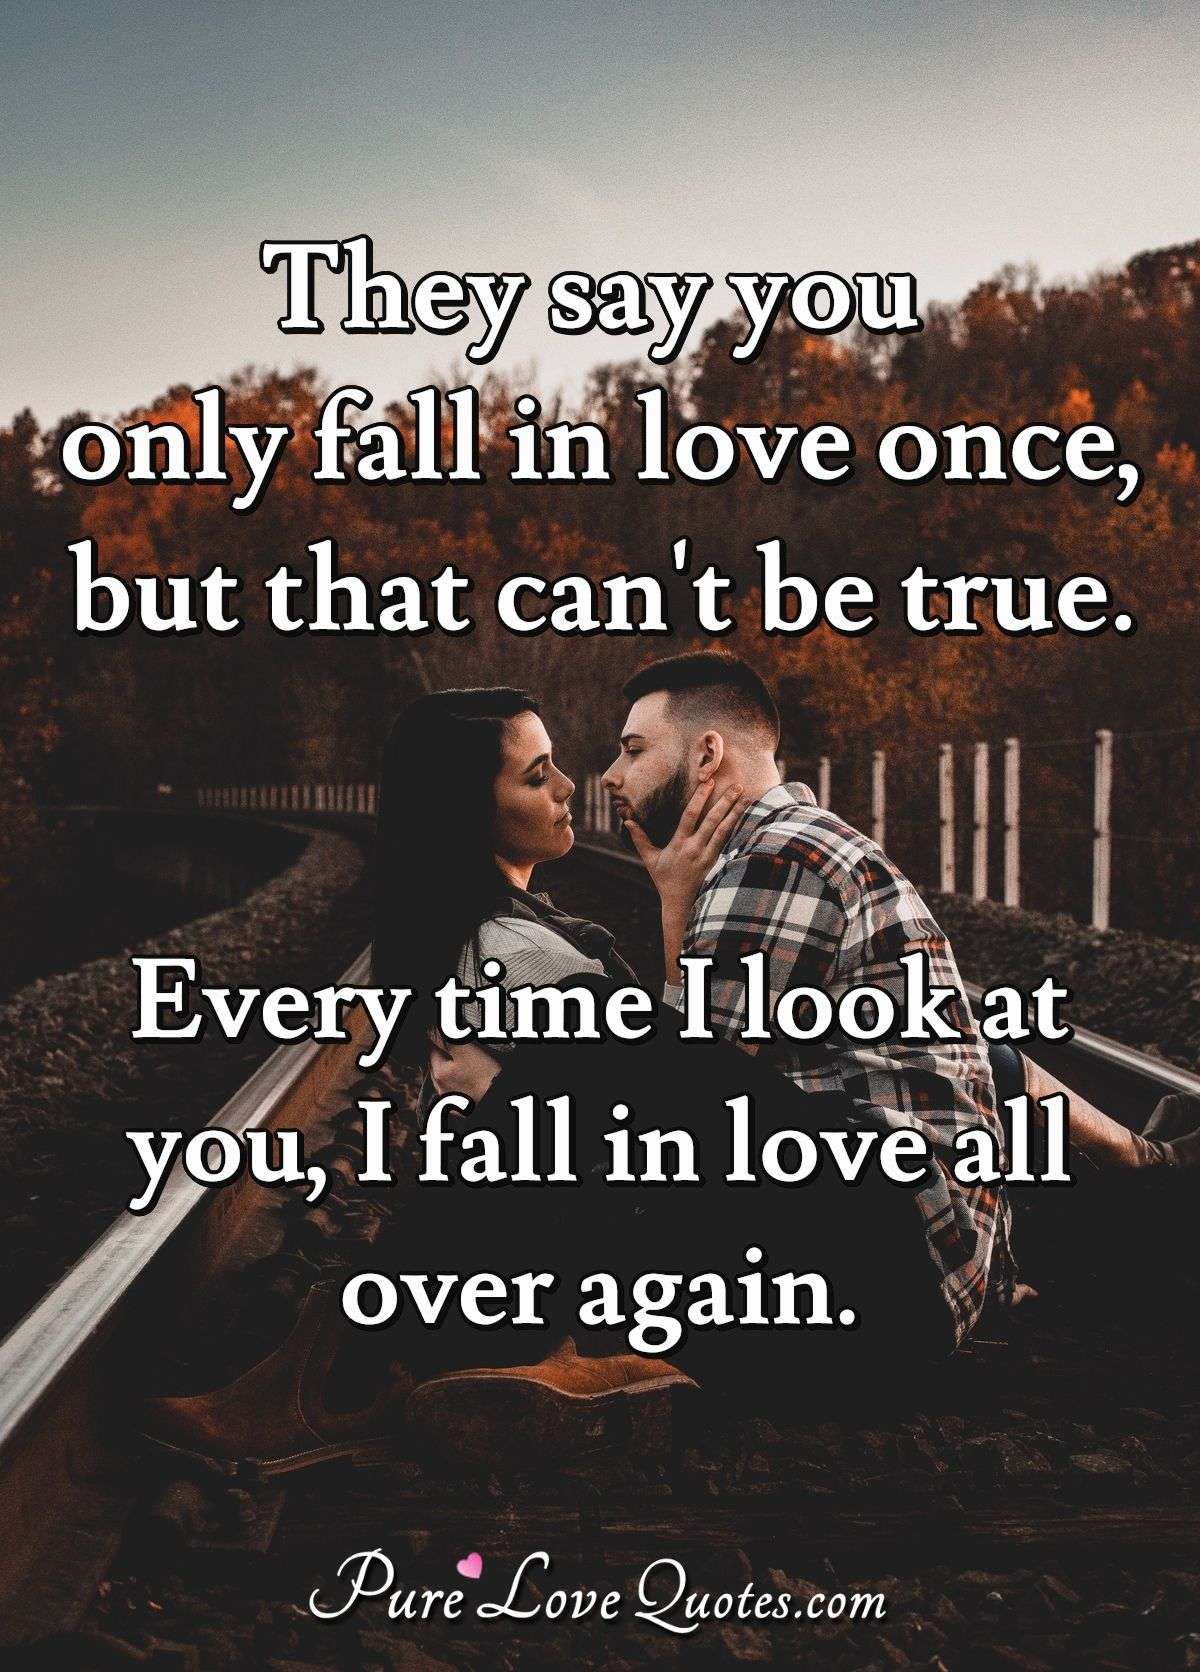 Why do people fall in love quotes